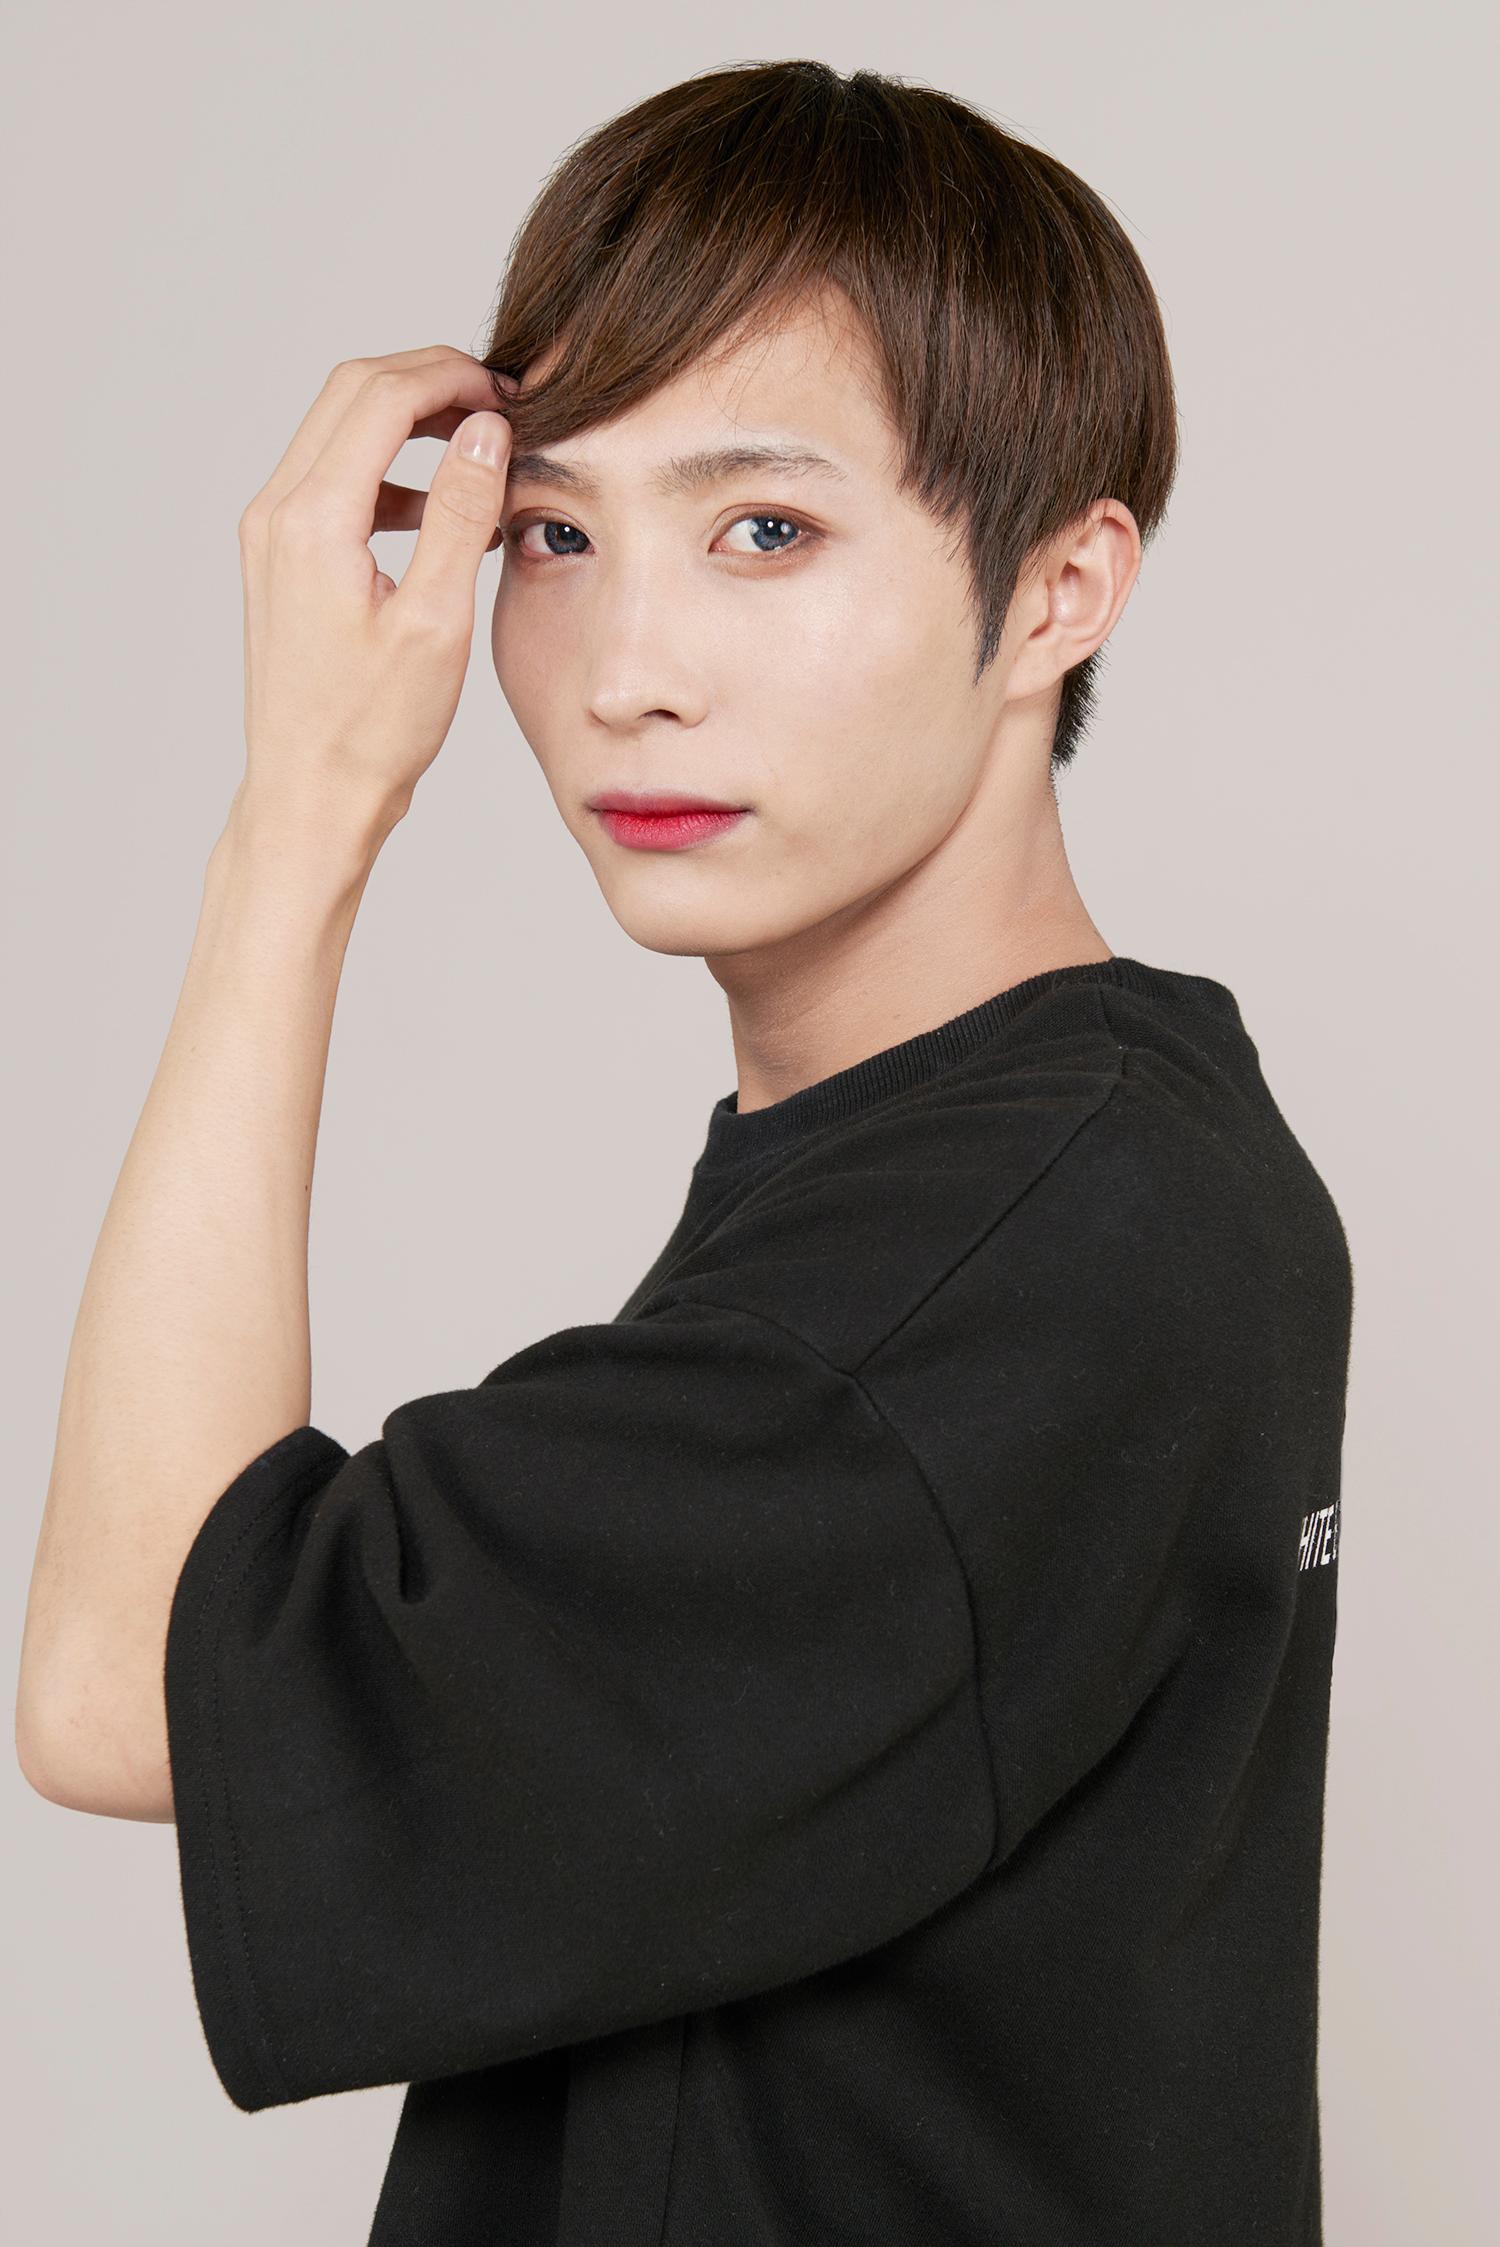 Corinne Mariaud Color Photograph - SENA-TOKYO - from the FLOWER BEAUTY BOYS Series